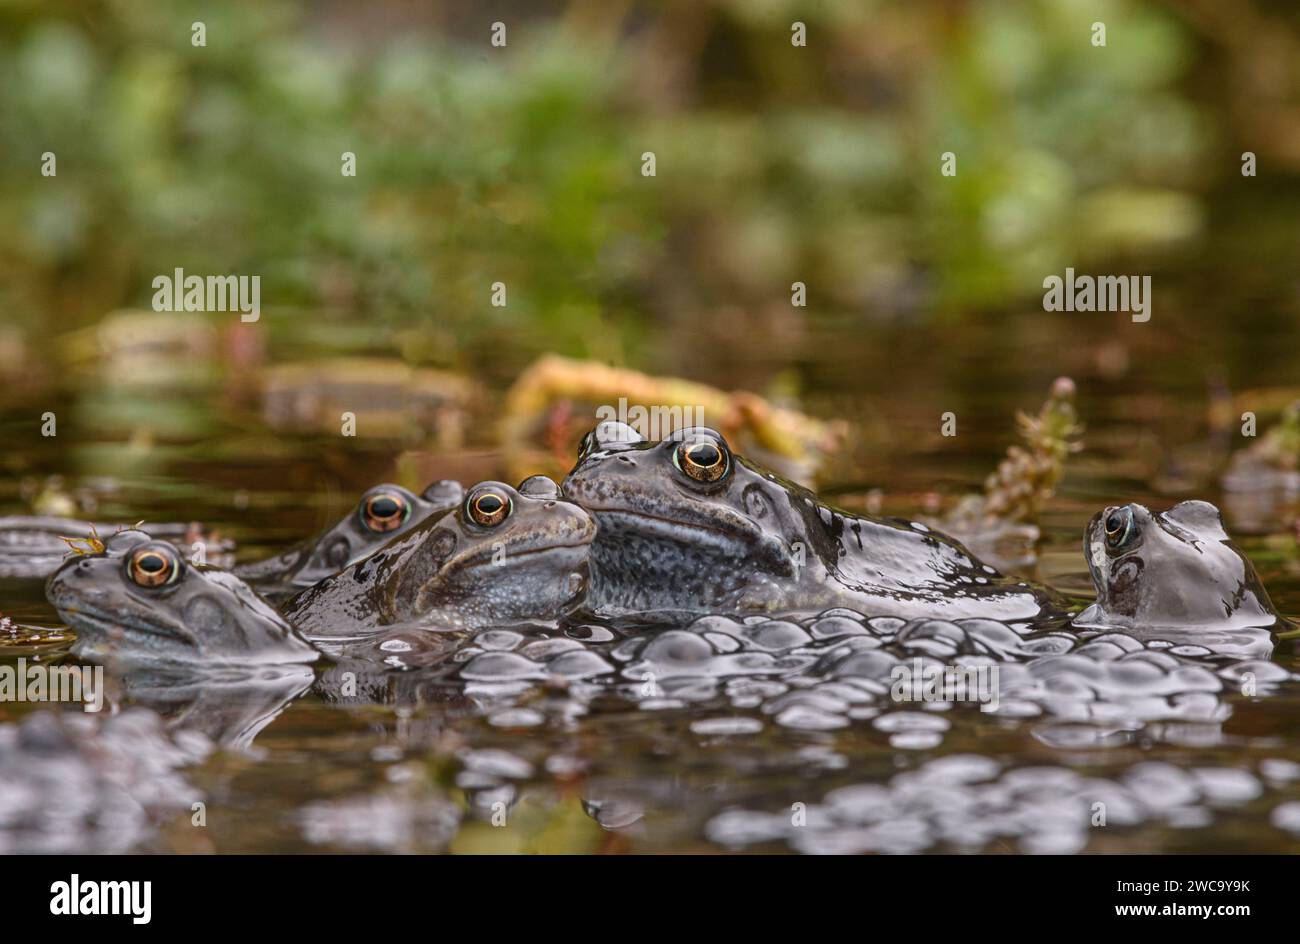 Common Frogs, Rana temporaria, European Common frogs, female surrounded by males in breeding pond, garden wildlife pond, surrounded by spawn, March Stock Photo